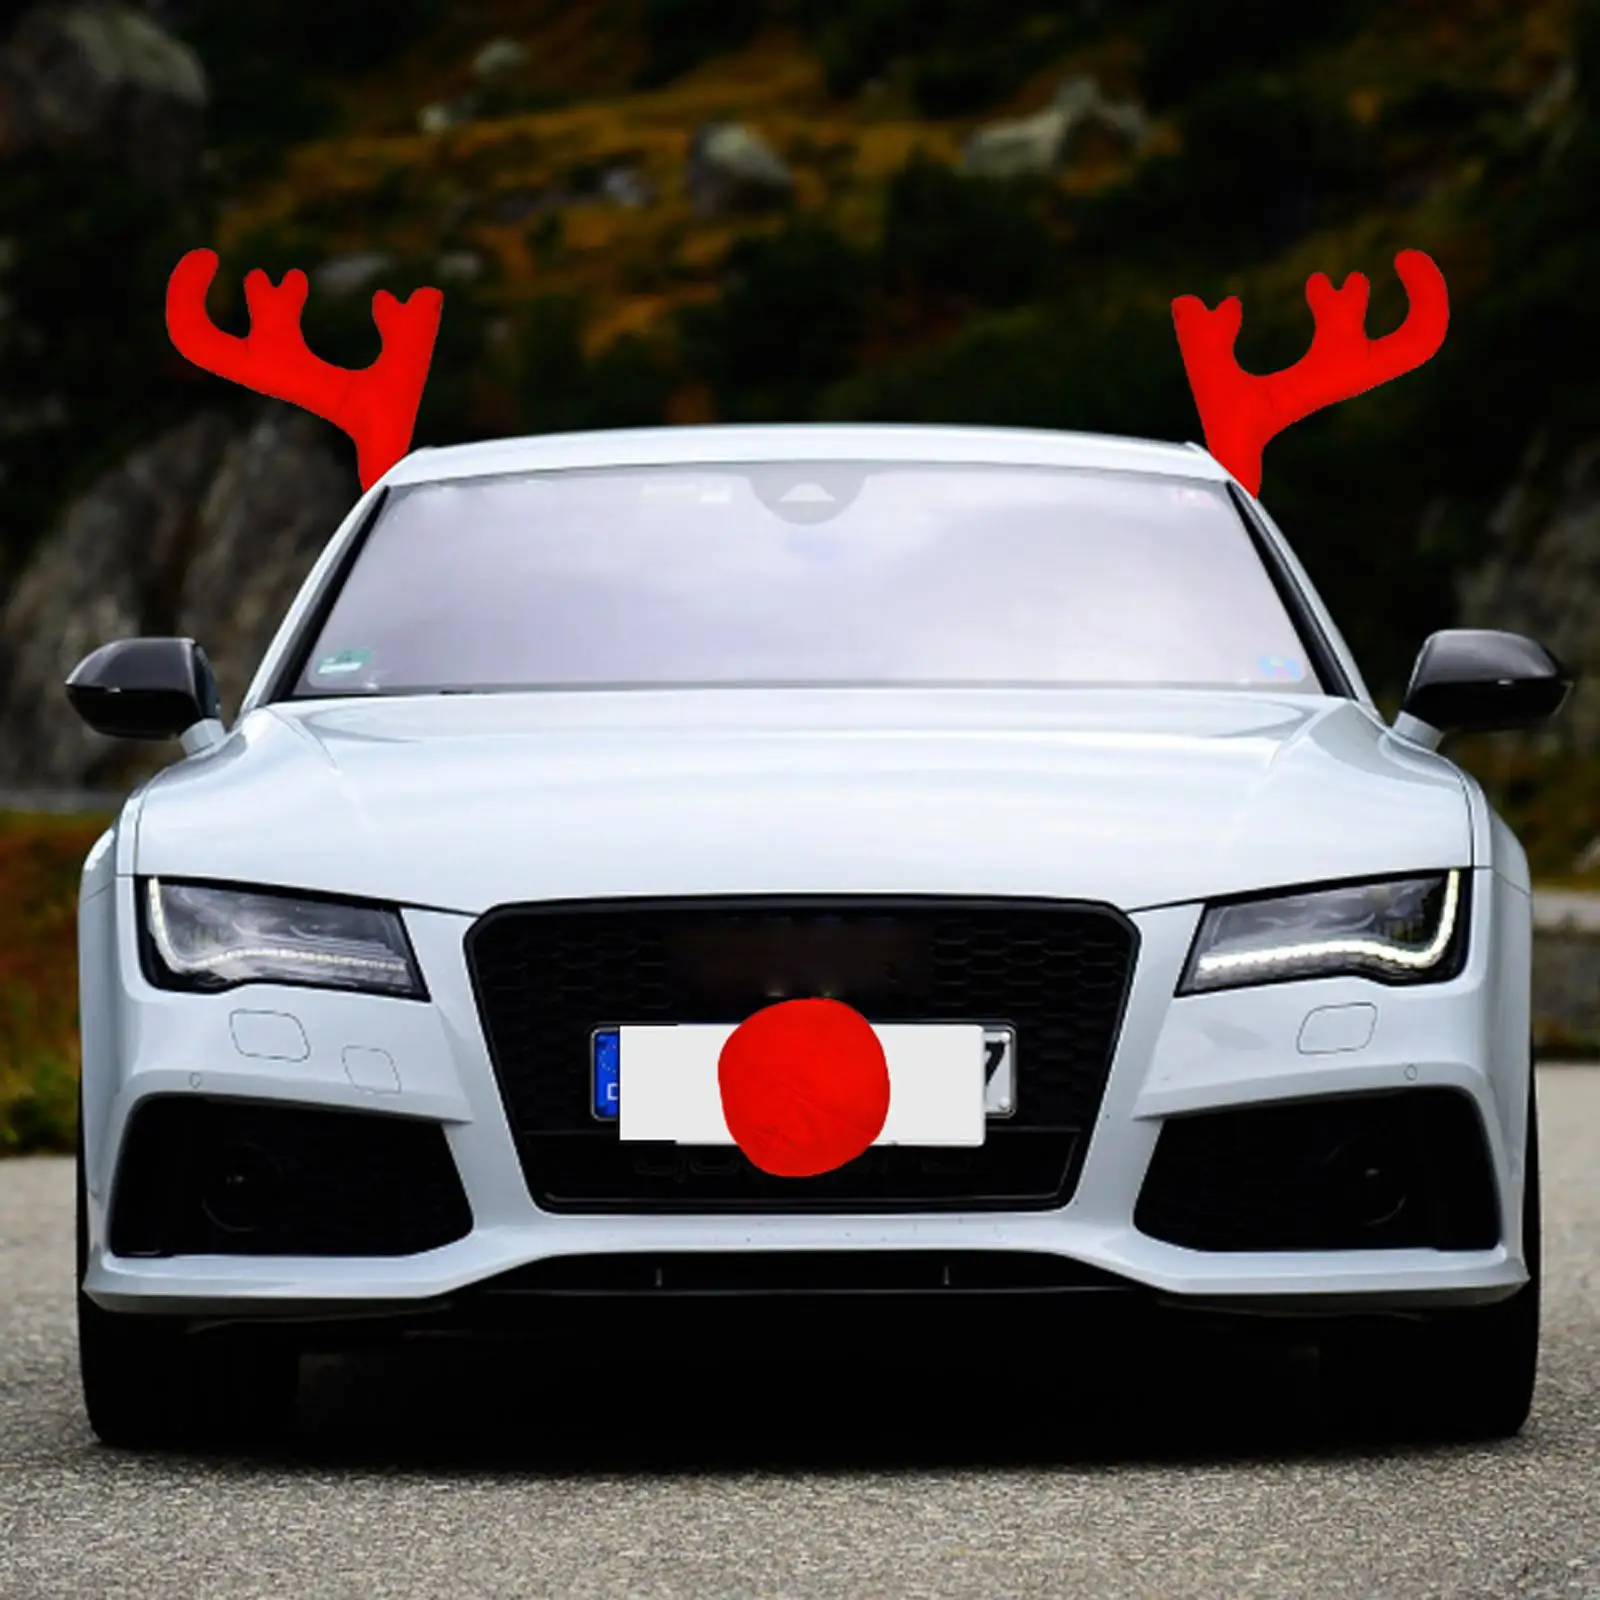 Car Antlers Nose Car Set Easy to Install with Clips Ornaments for Front Grille